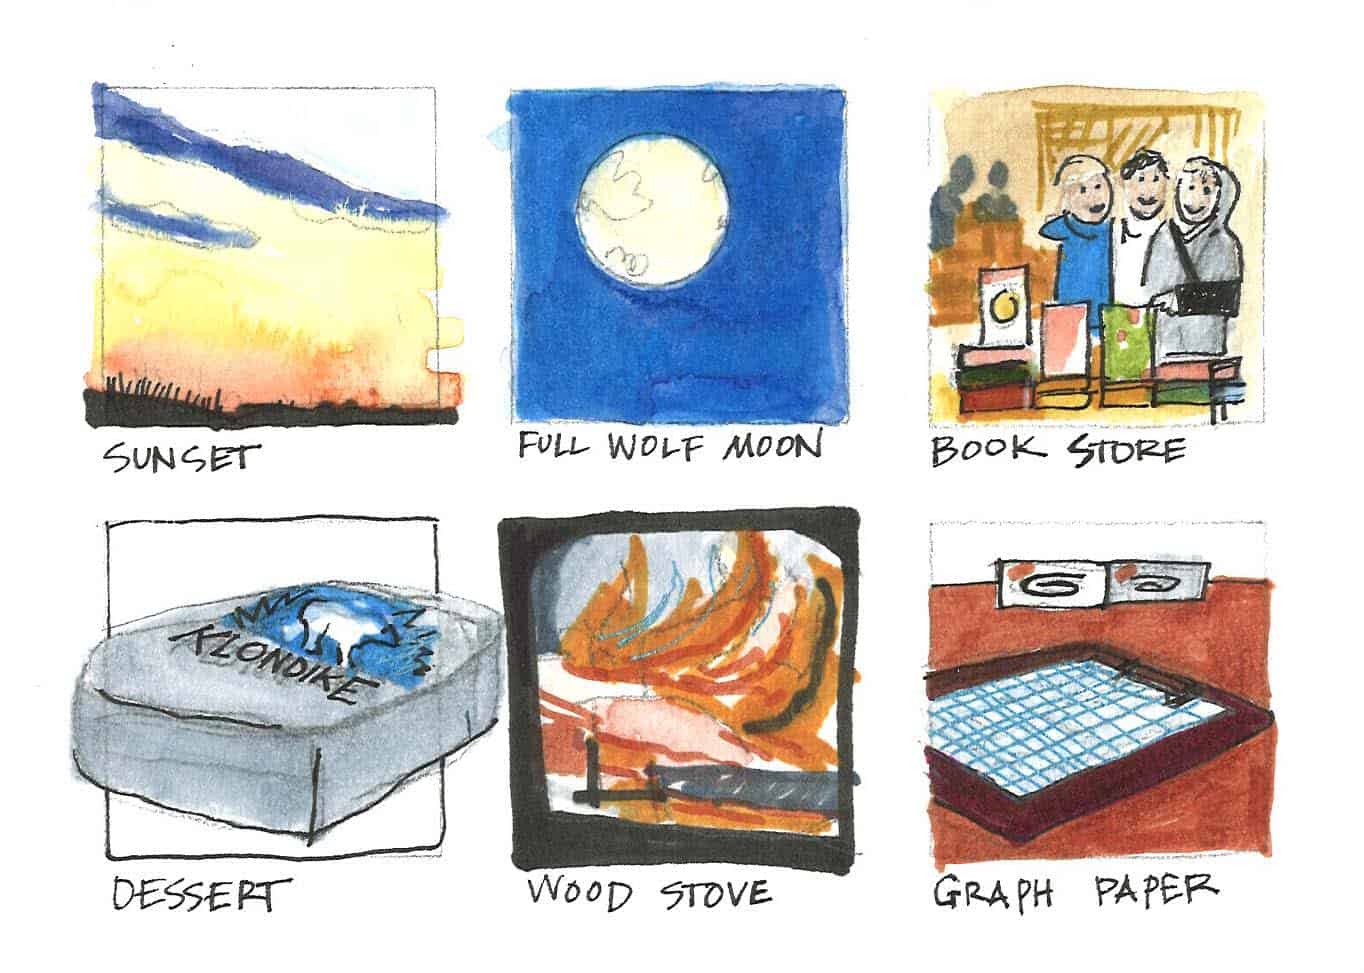 Beth Lovell, Winter Day Comic, 2012. Watercolor and ink, 5" x 7".